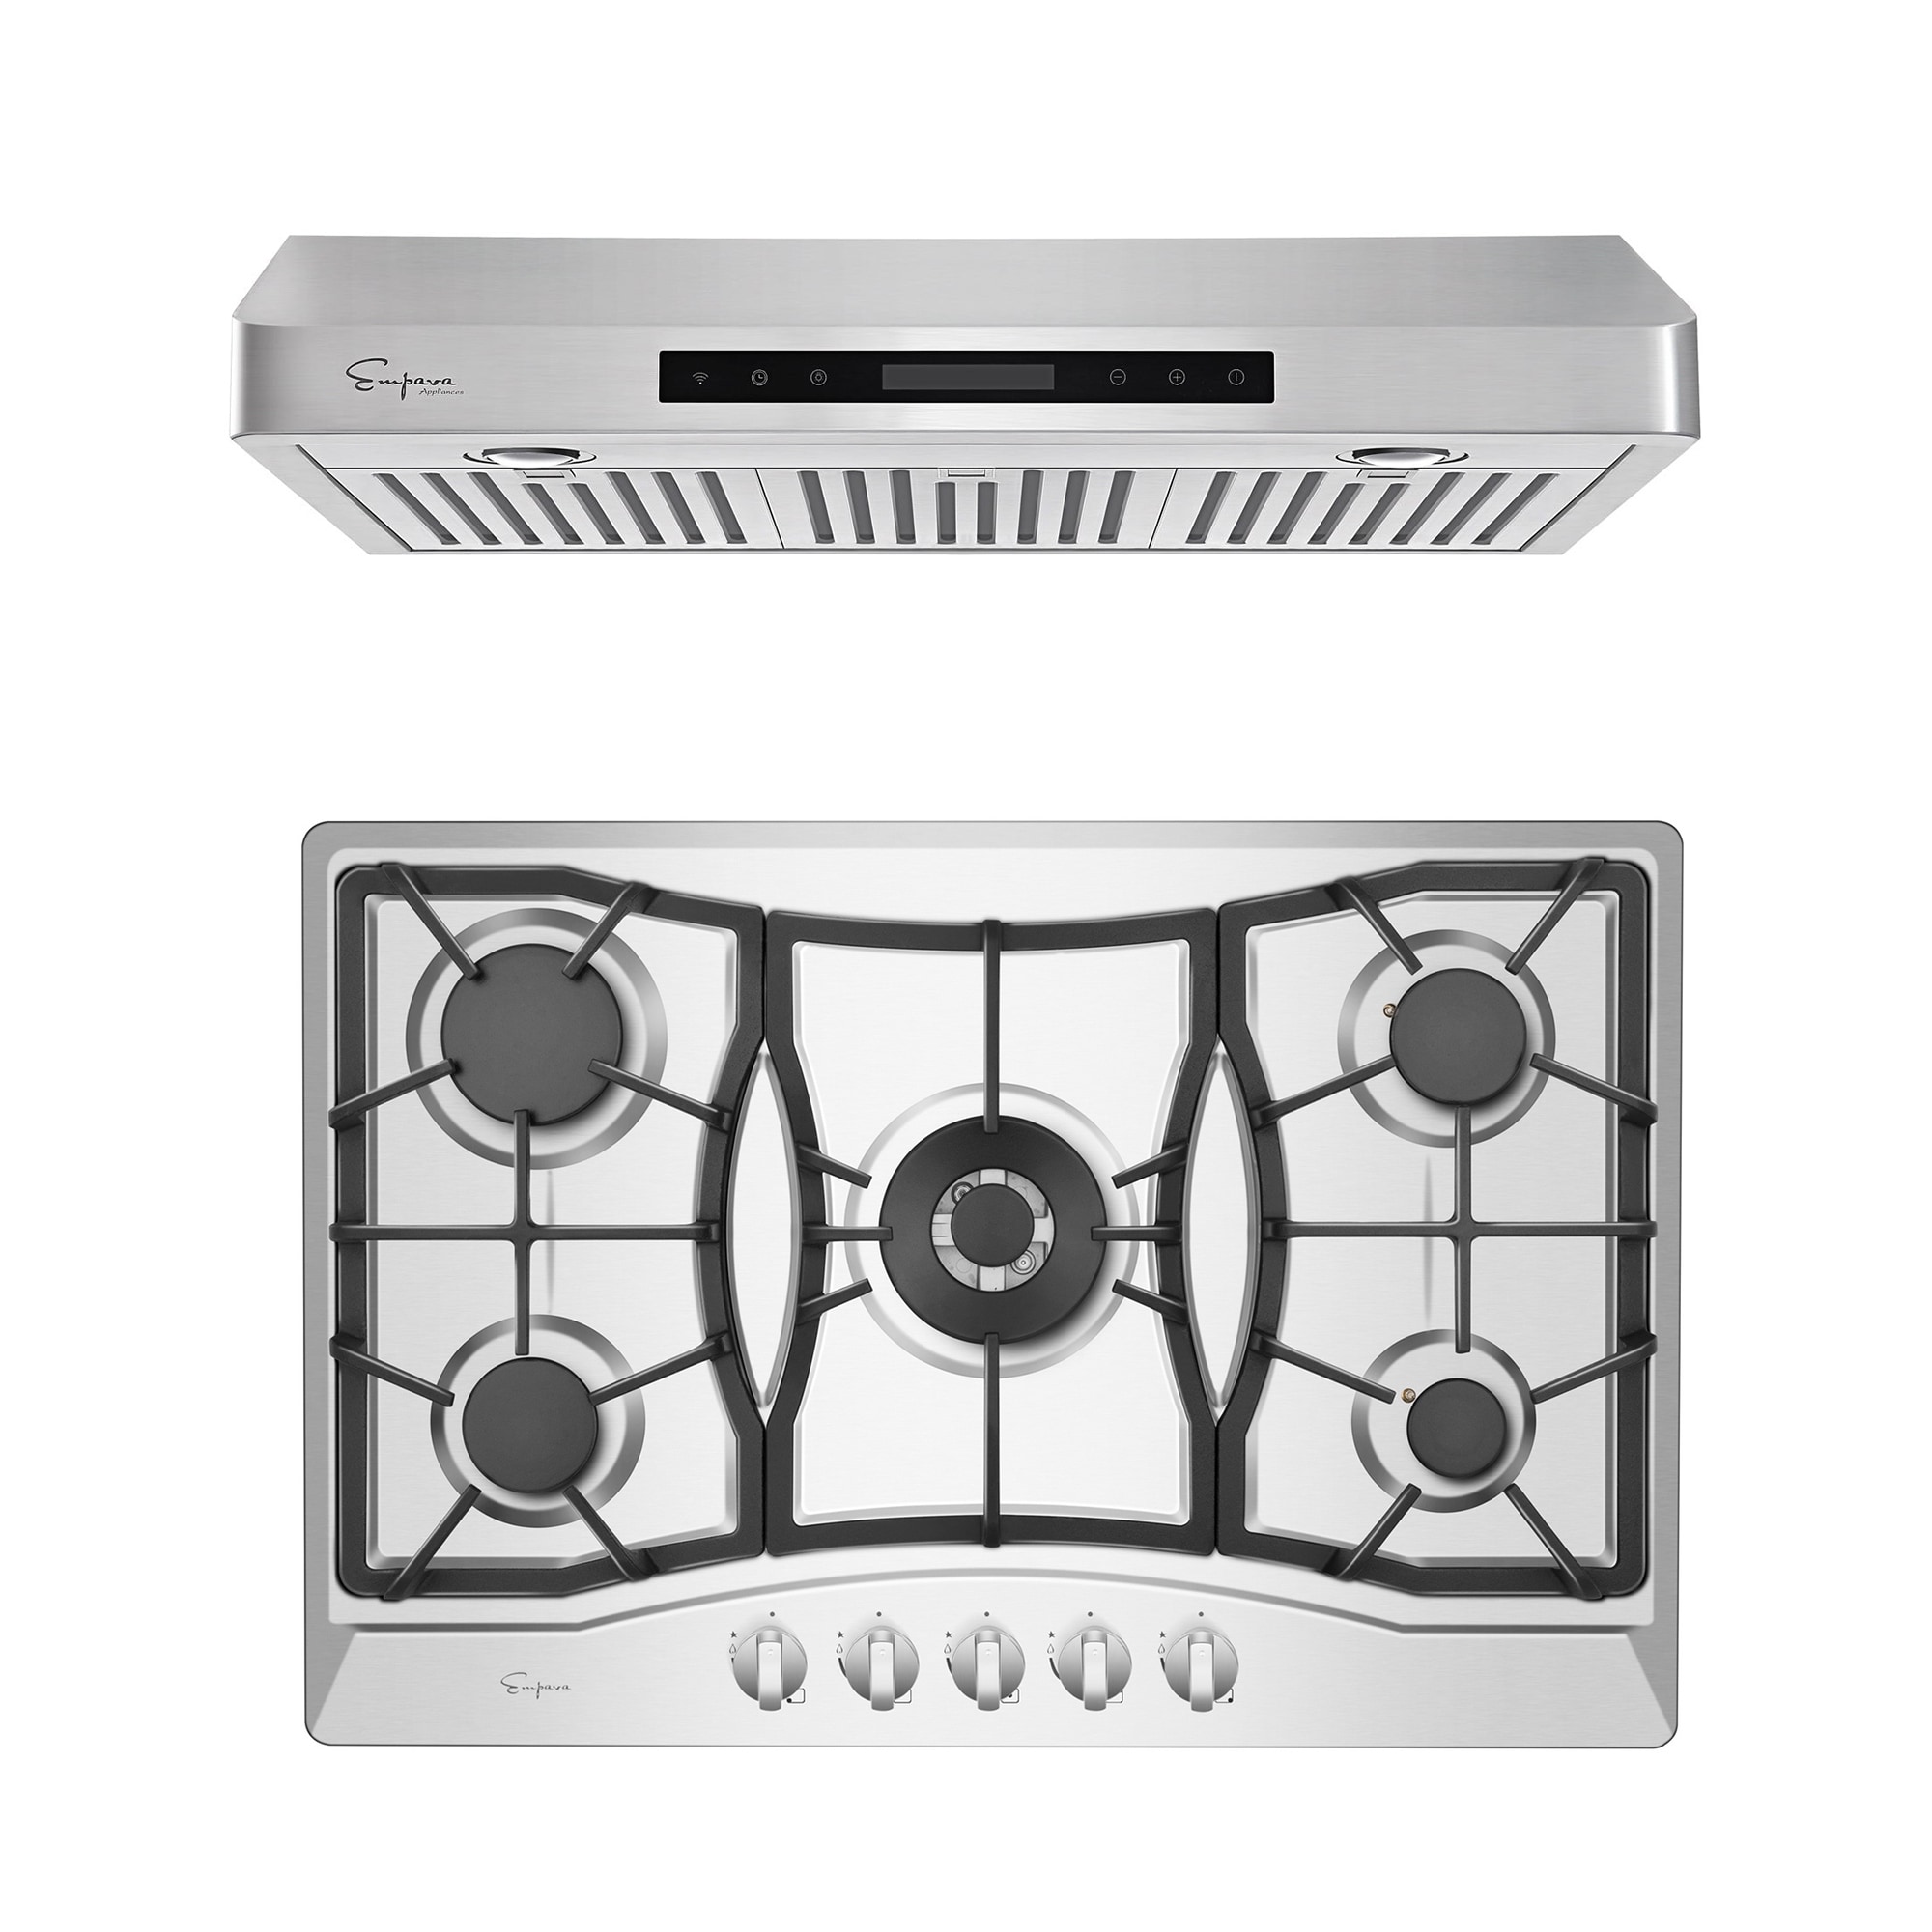 Empava 2 Piece Kitchen Appliances Packages Including 30" Gas Cooktop and 36" Under Cabinet Range Hood